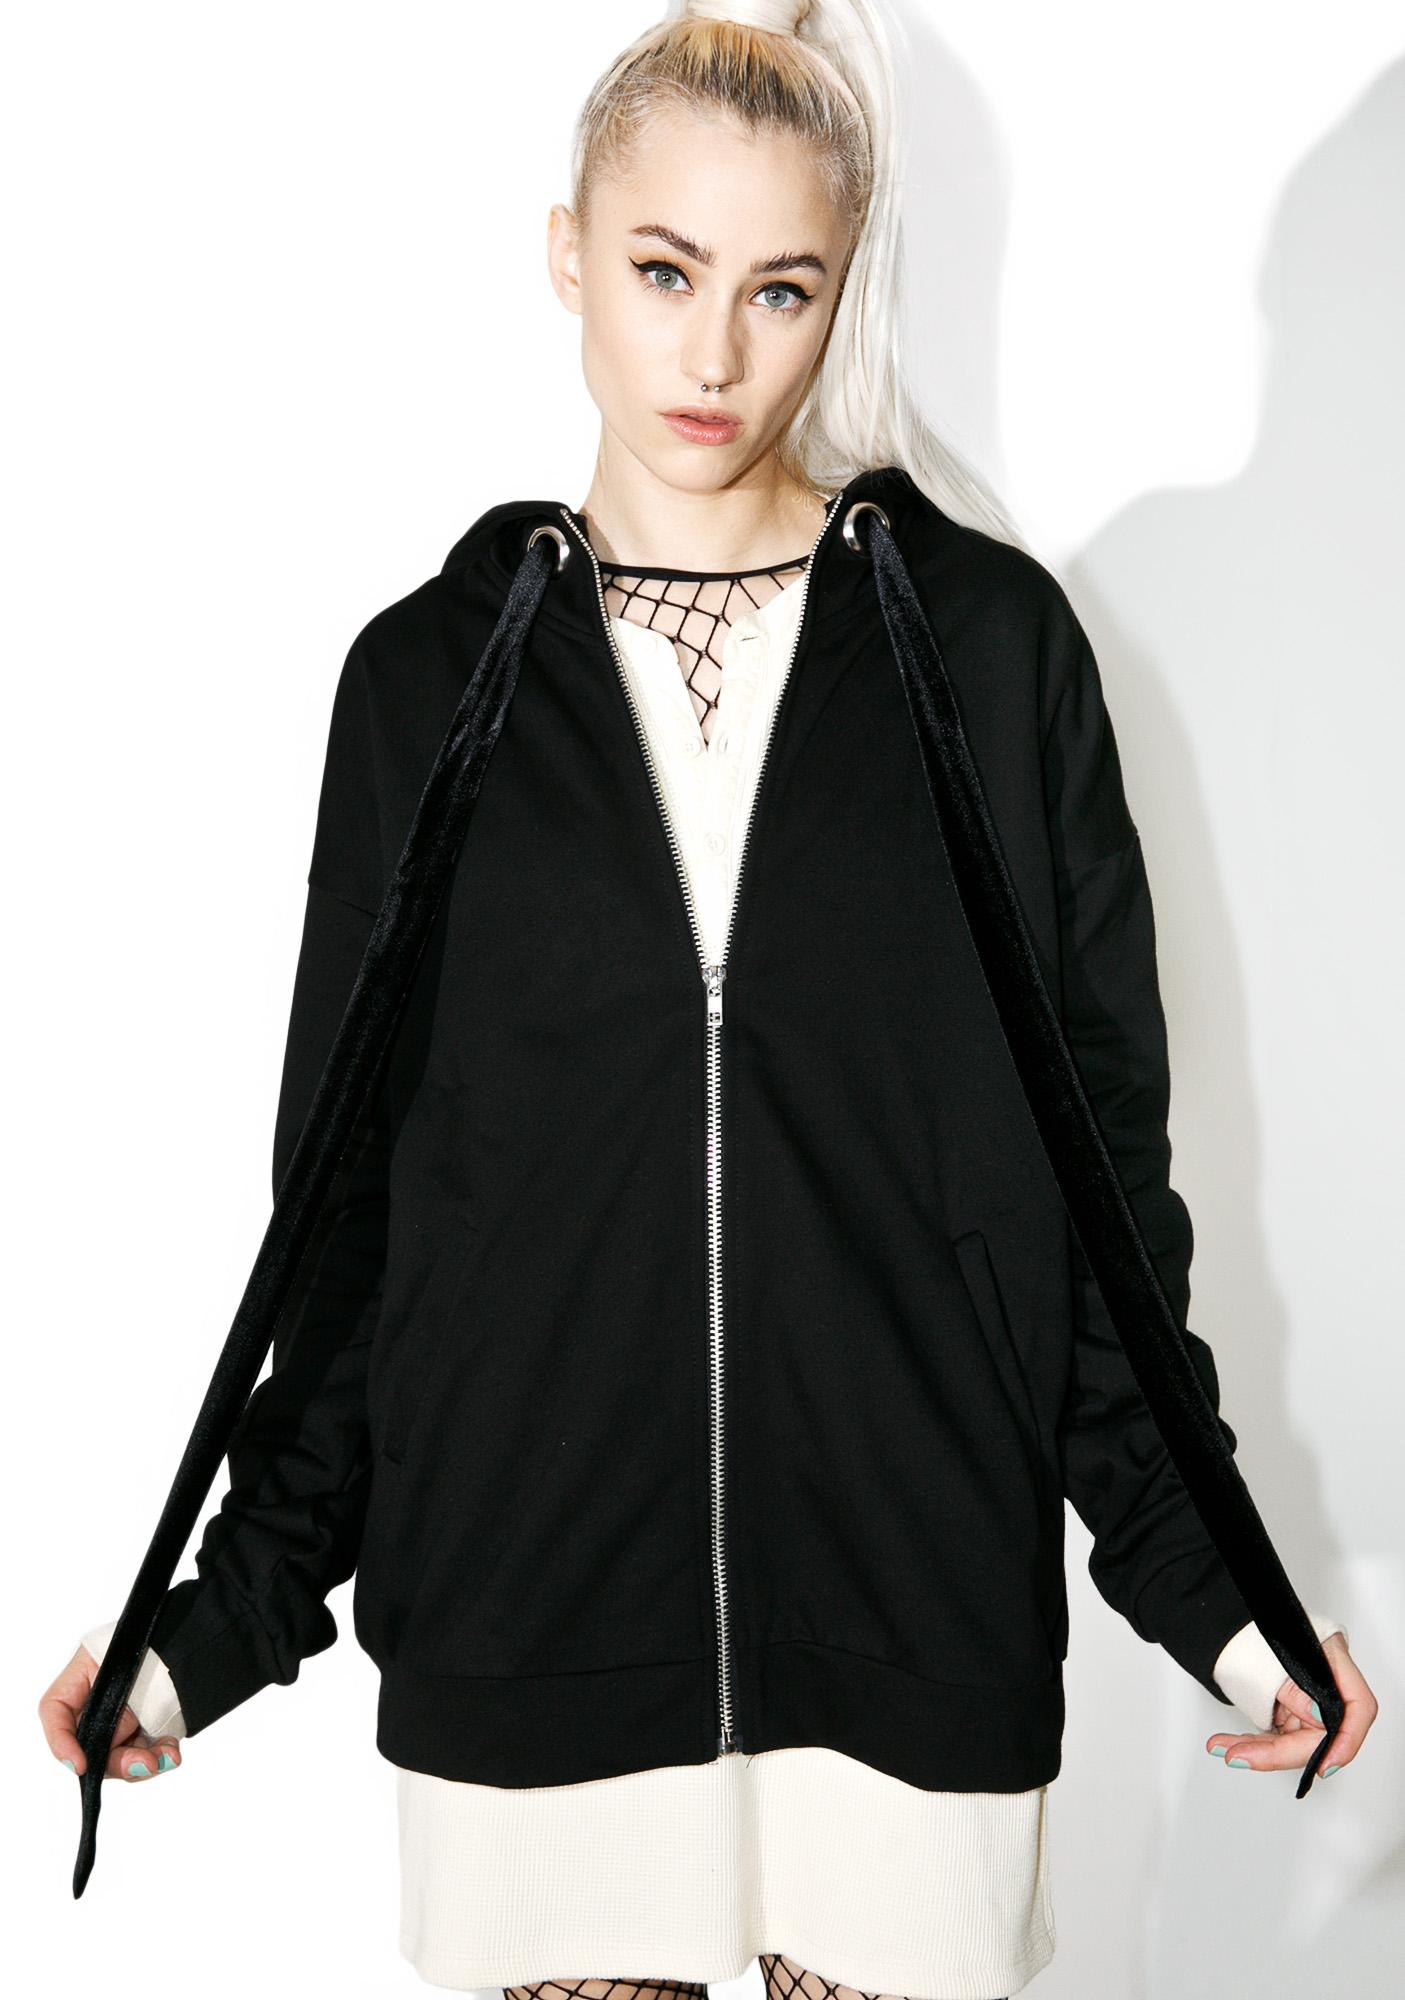 Oversized Black Zip Up Hoodie Outfit : Urban-Outfitters-BDG-Womens ...